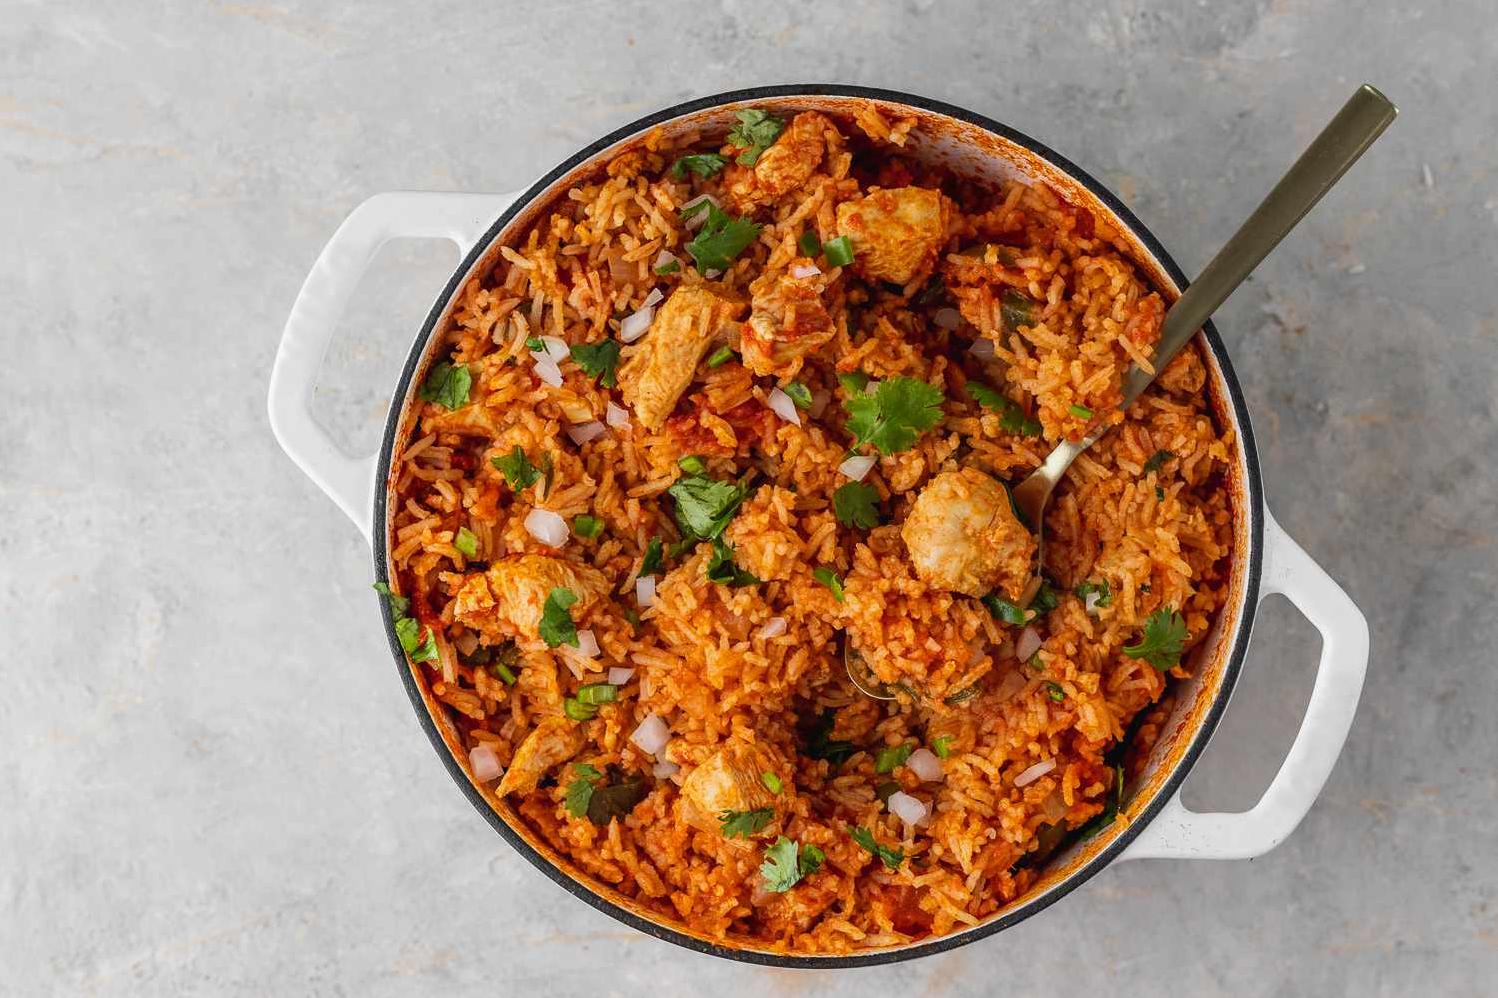  Tender chicken pieces sitting on a bed of aromatic rice, a feast for the eyes and the taste buds!